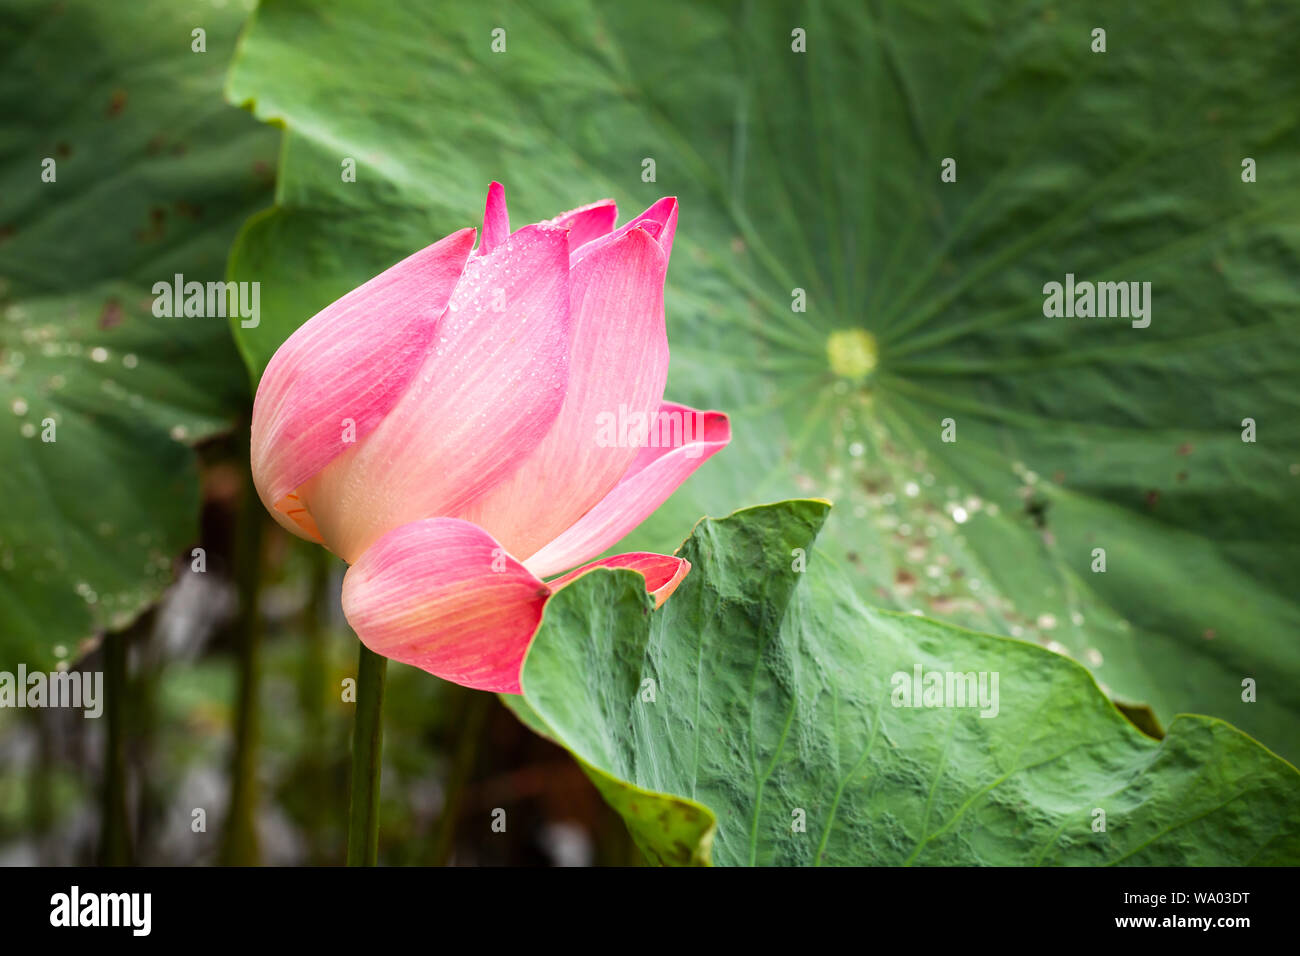 Pink waterlily bud. Lotus flower. Close-up photo with selective focus taken in Malaysian rainforest Stock Photo